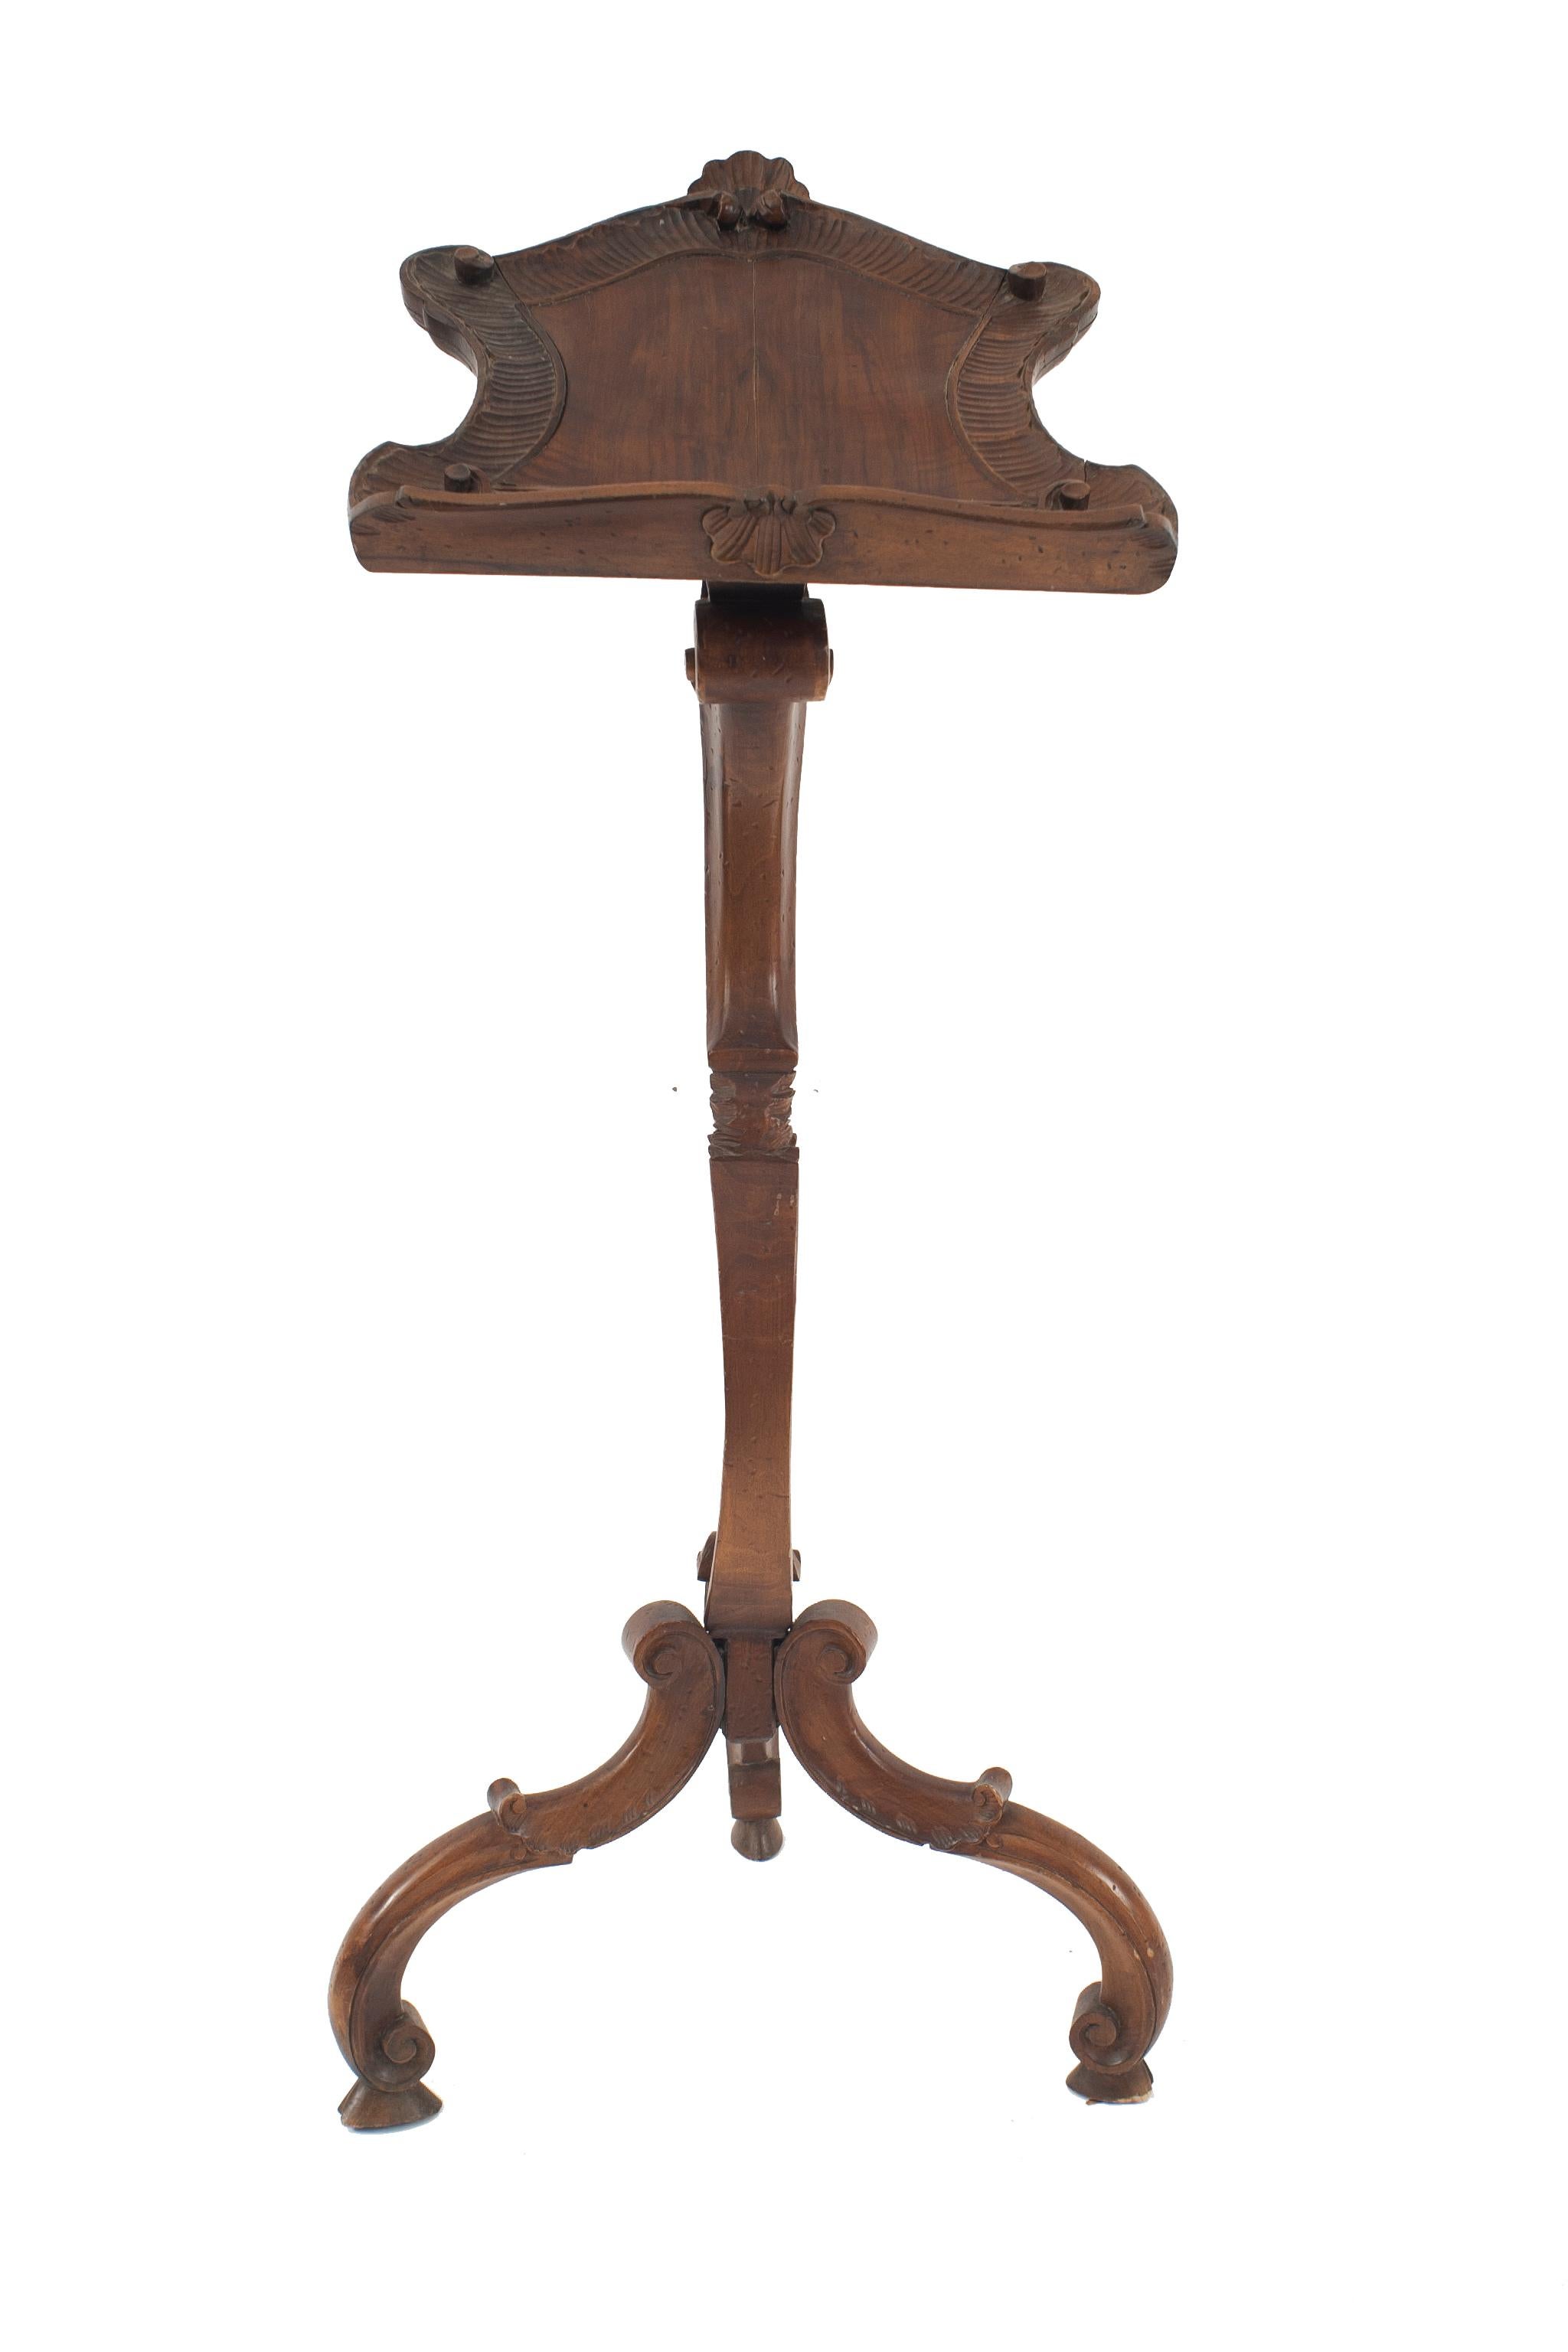 Italian Venetian Rococo Grotto style (18/19th Cent) lectern / music stand with a pedestal base with three legs and carved detail.
